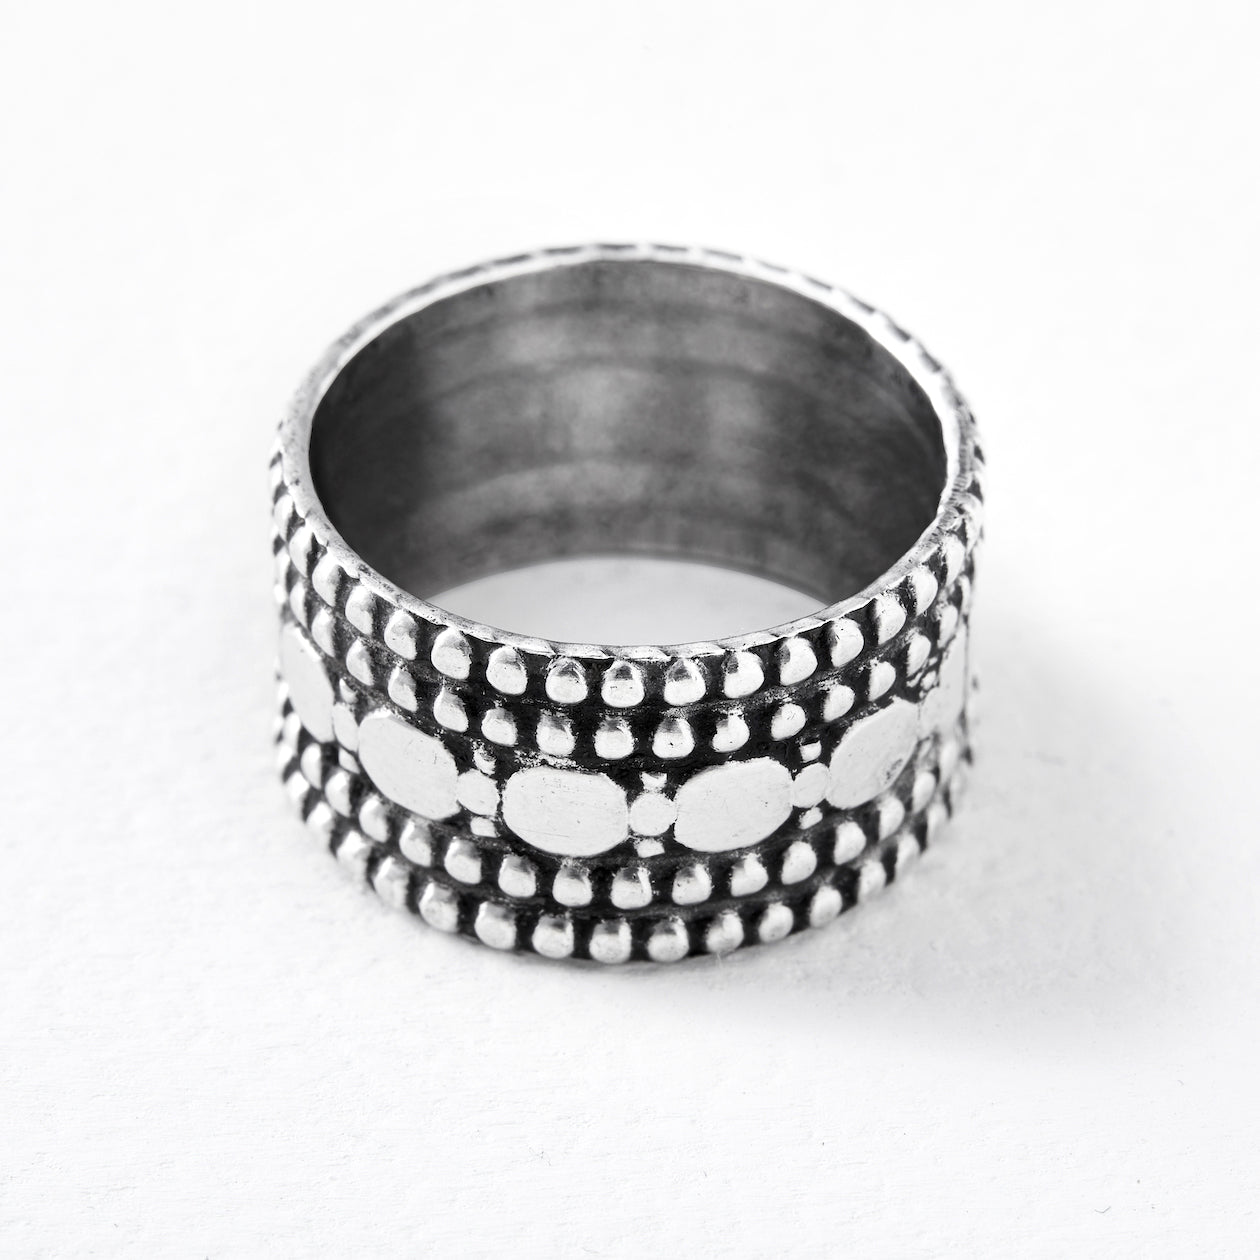 c'est beau1872 Jewelry - Amplified Silver Ring